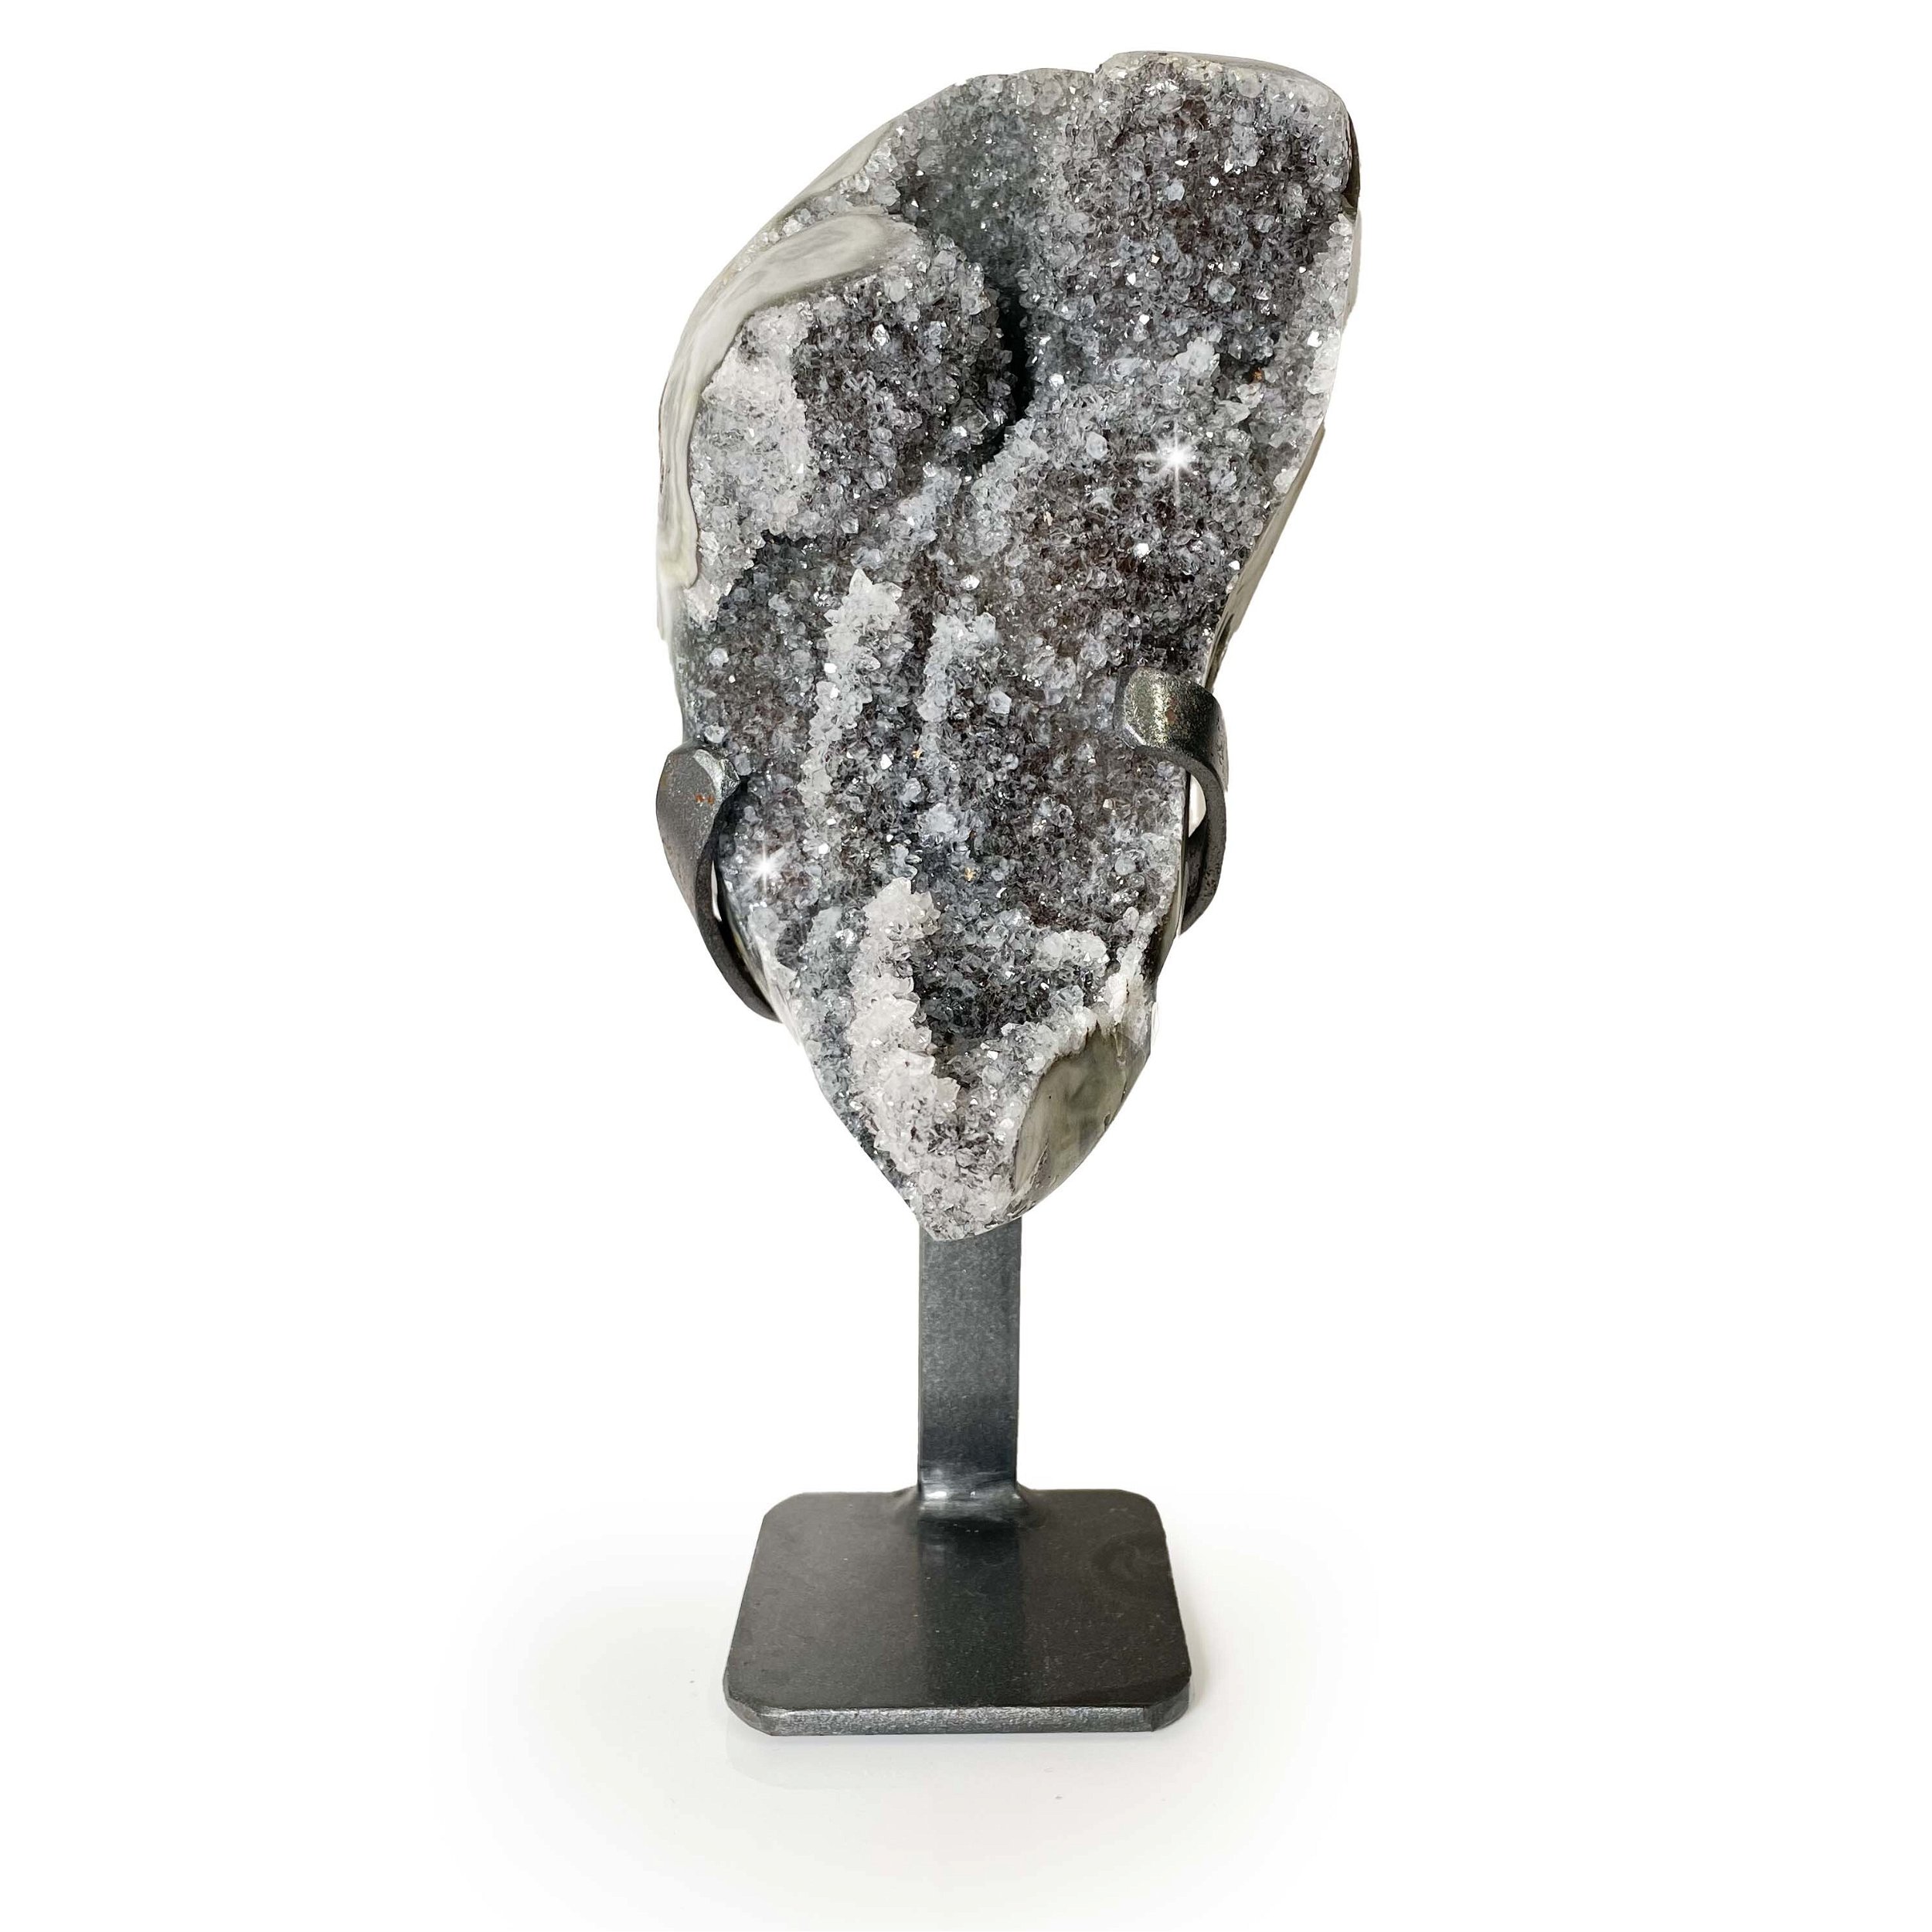 Druze Geode On A Fitted Spiral Stand - Icy Gray With White Agate